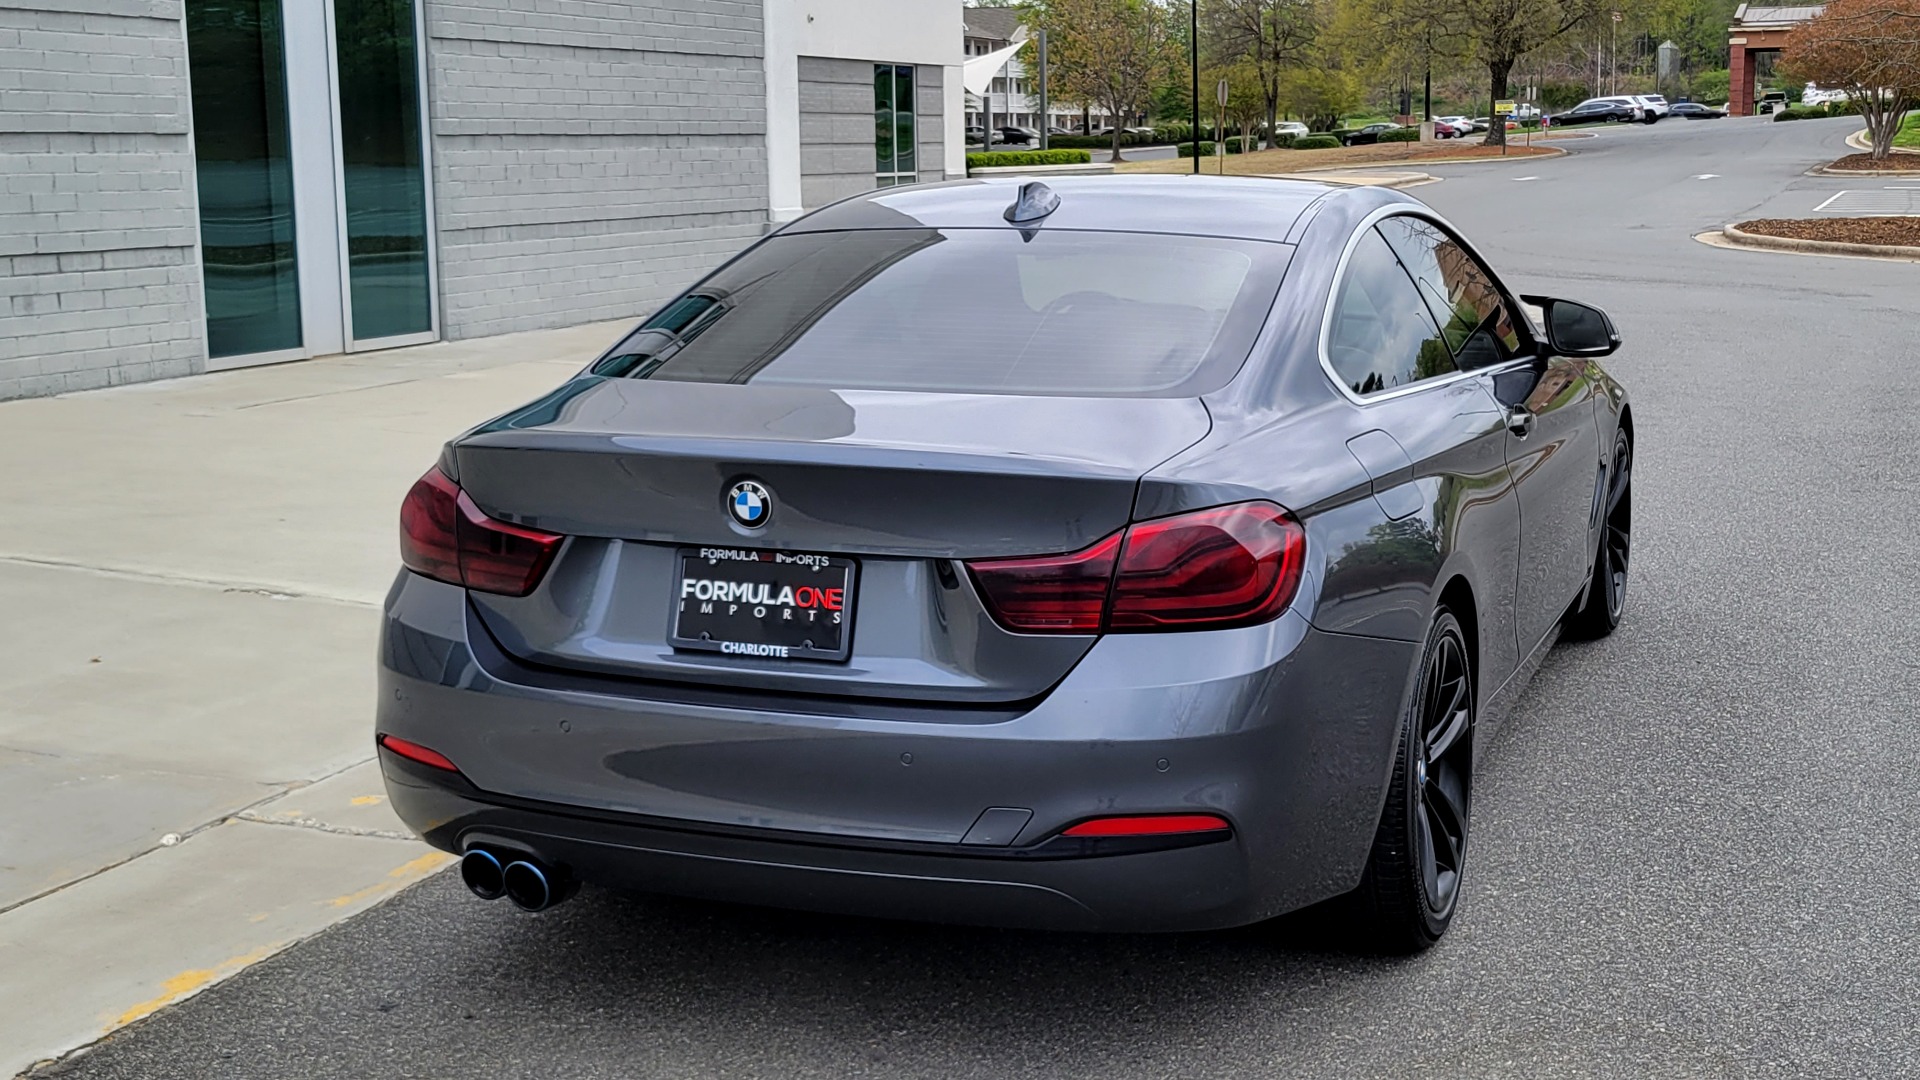 Used 2019 BMW 4 SERIES 430I COUPE 2.0L / RWD / DRVR ASST / CONV PKG / SUNROOF / REARVIEW for sale Sold at Formula Imports in Charlotte NC 28227 14